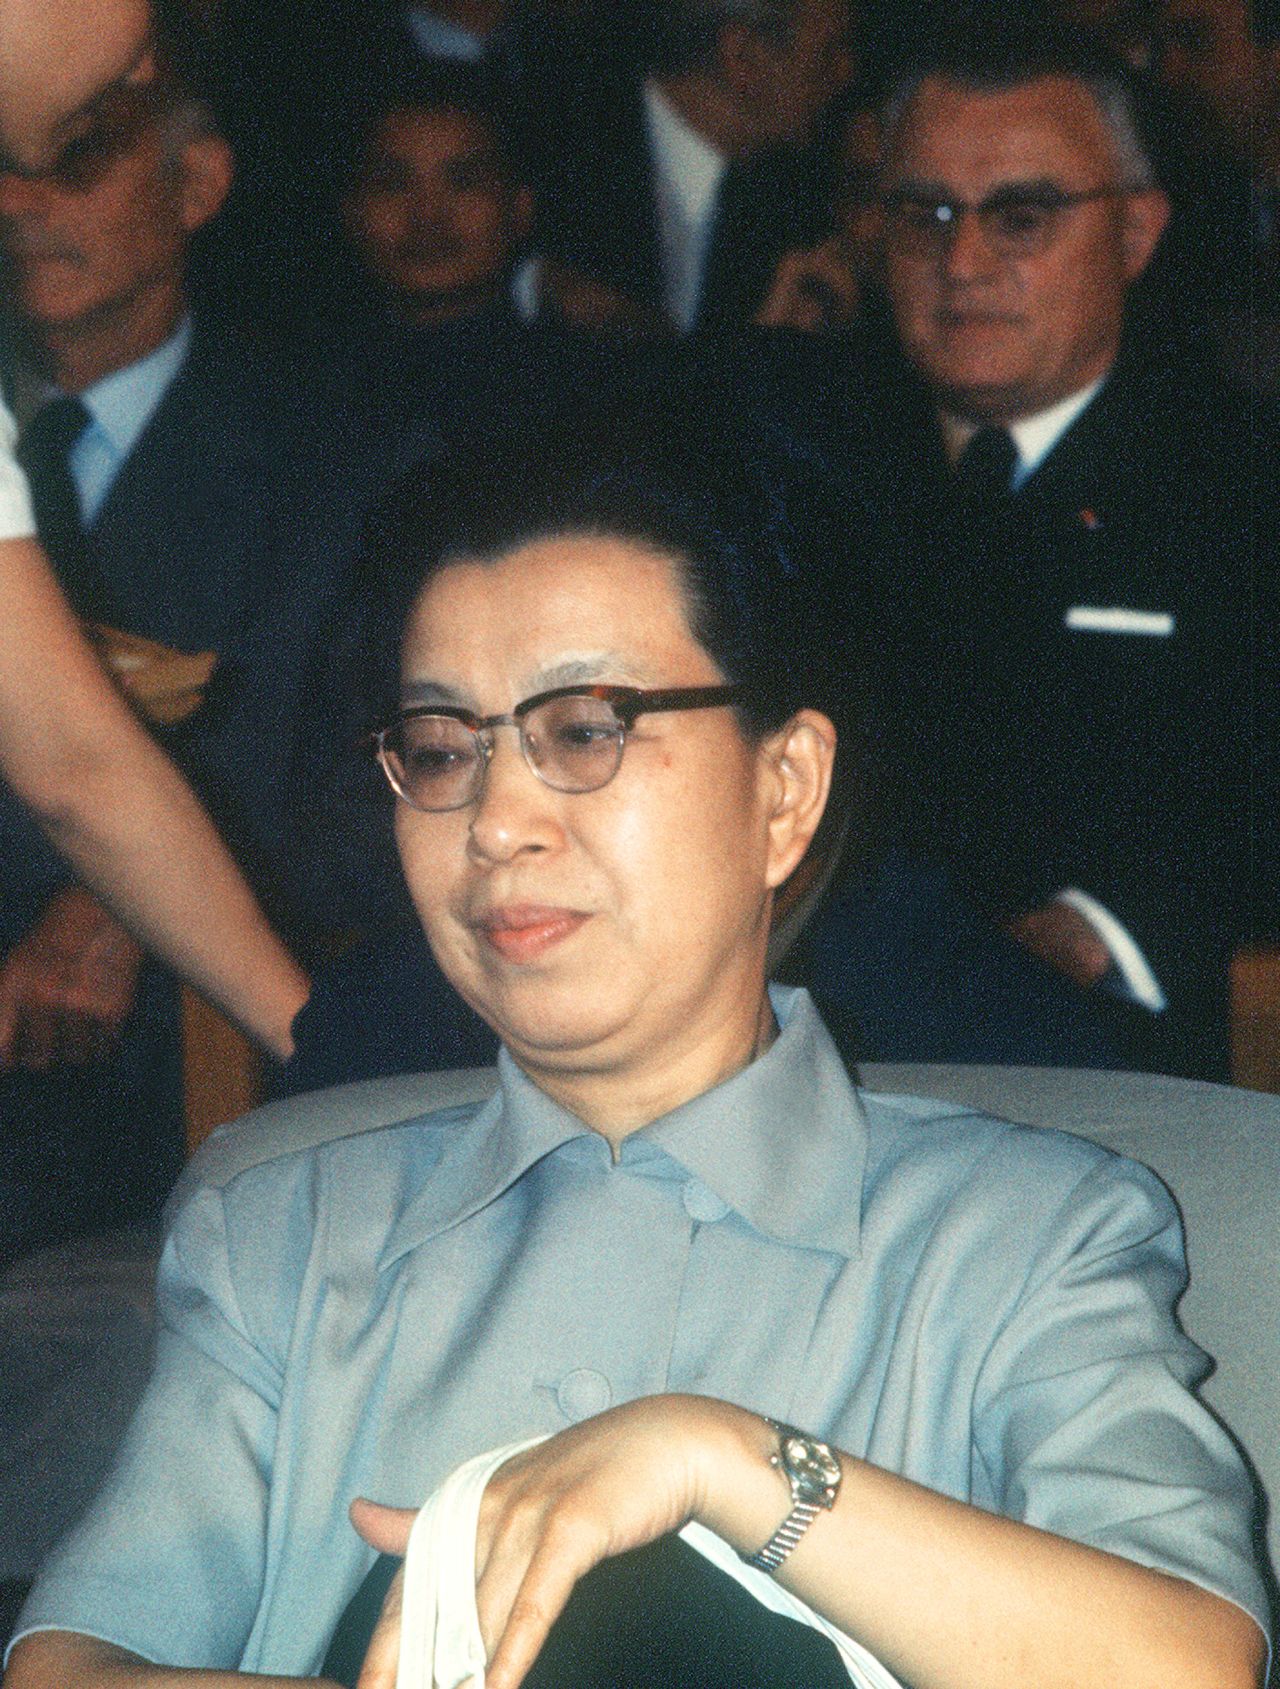 Mao Zedong's wife Jiang Qing was appointed as head of the Film Agency of the Central Propaganda Department in 1950.